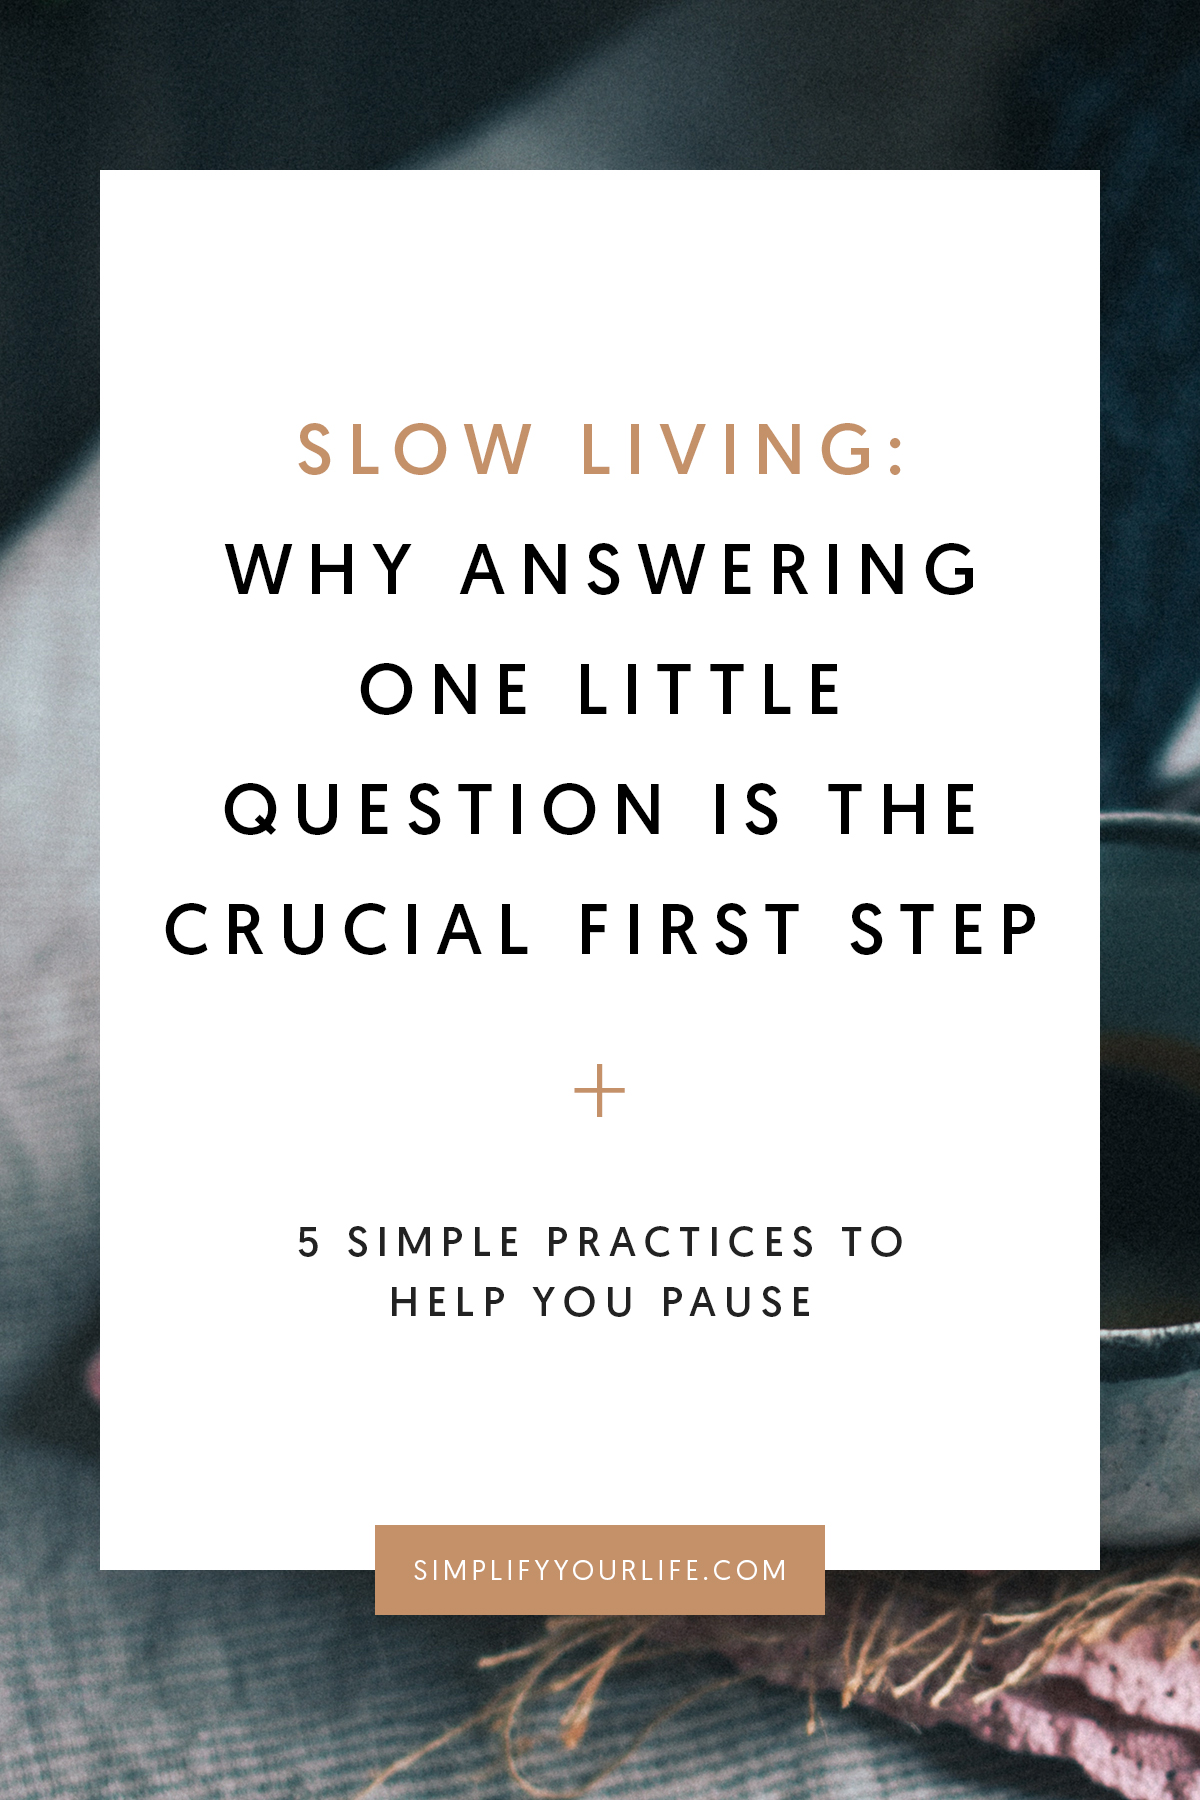 Slow living, simple practices